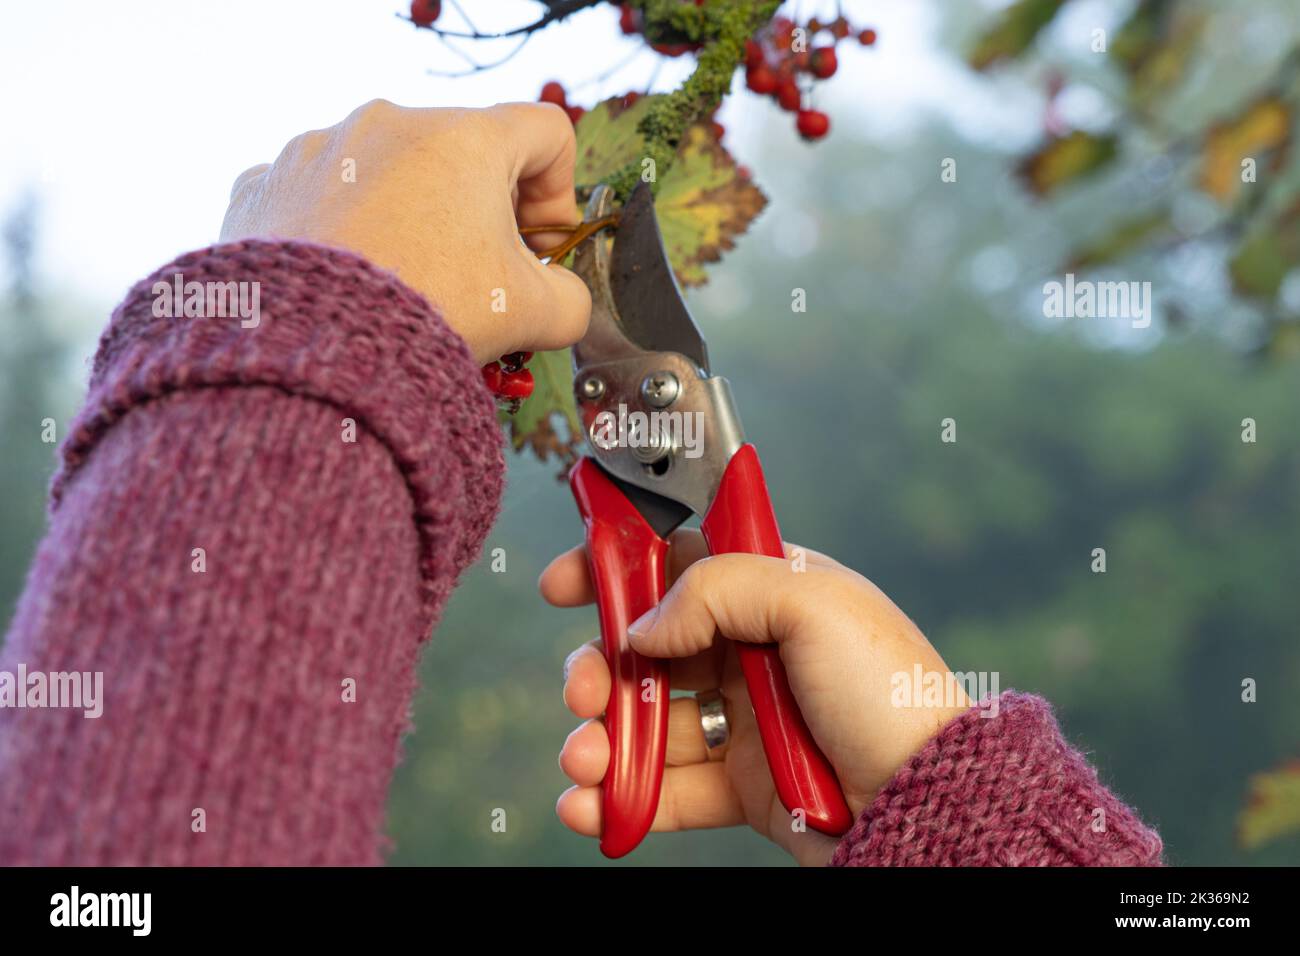 Pruning a tree by hand with garden shears Stock Photo